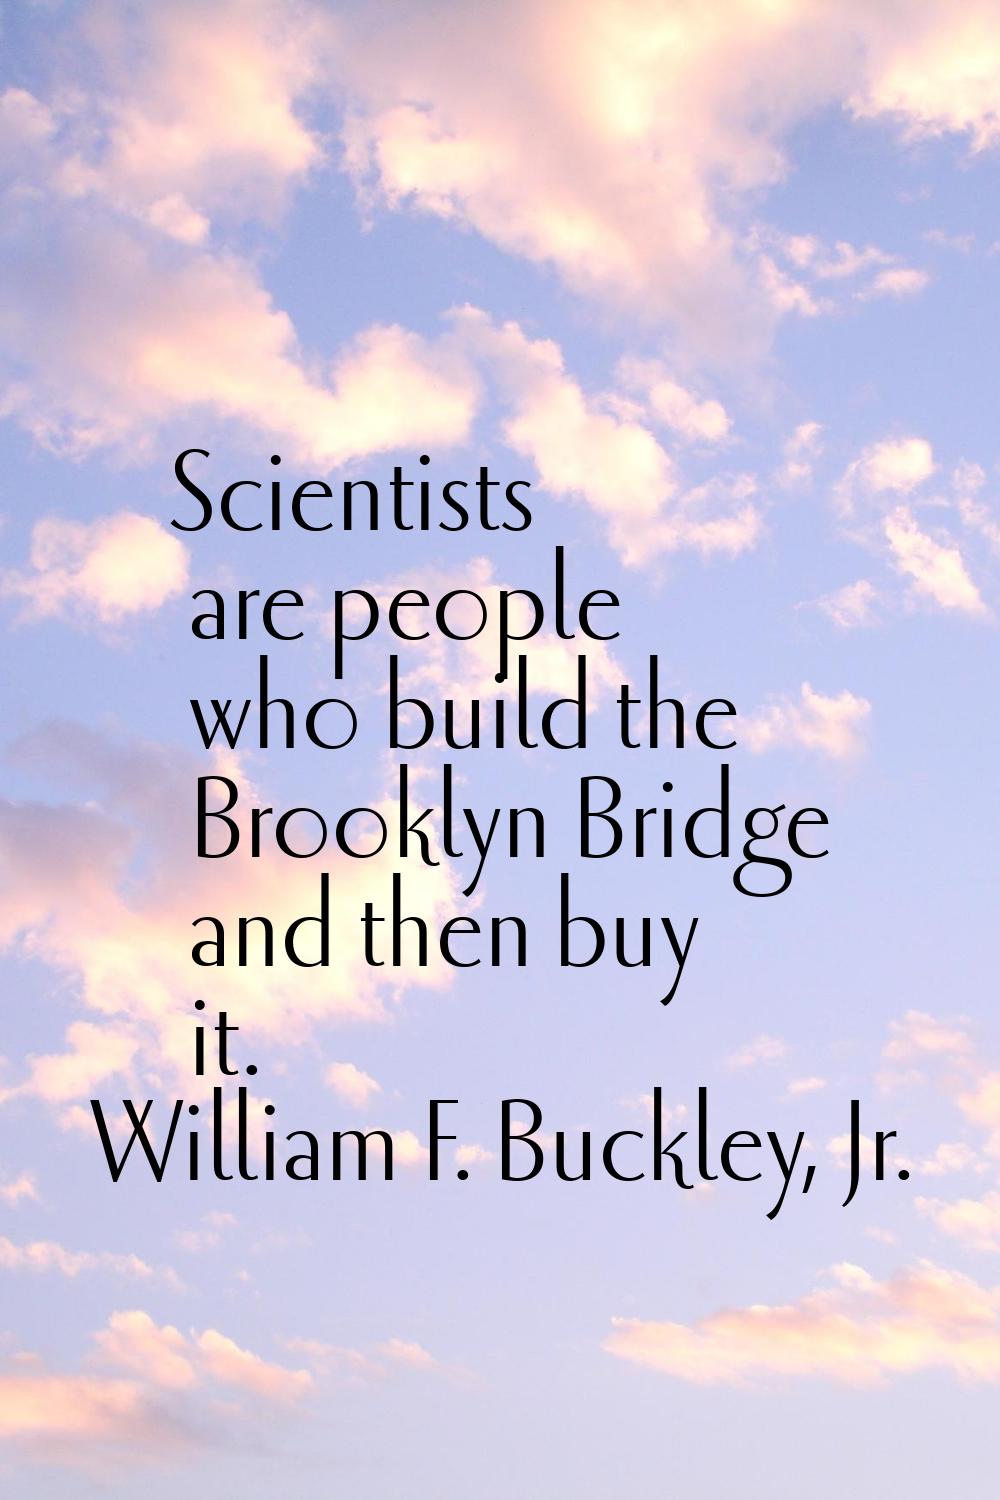 Scientists are people who build the Brooklyn Bridge and then buy it.